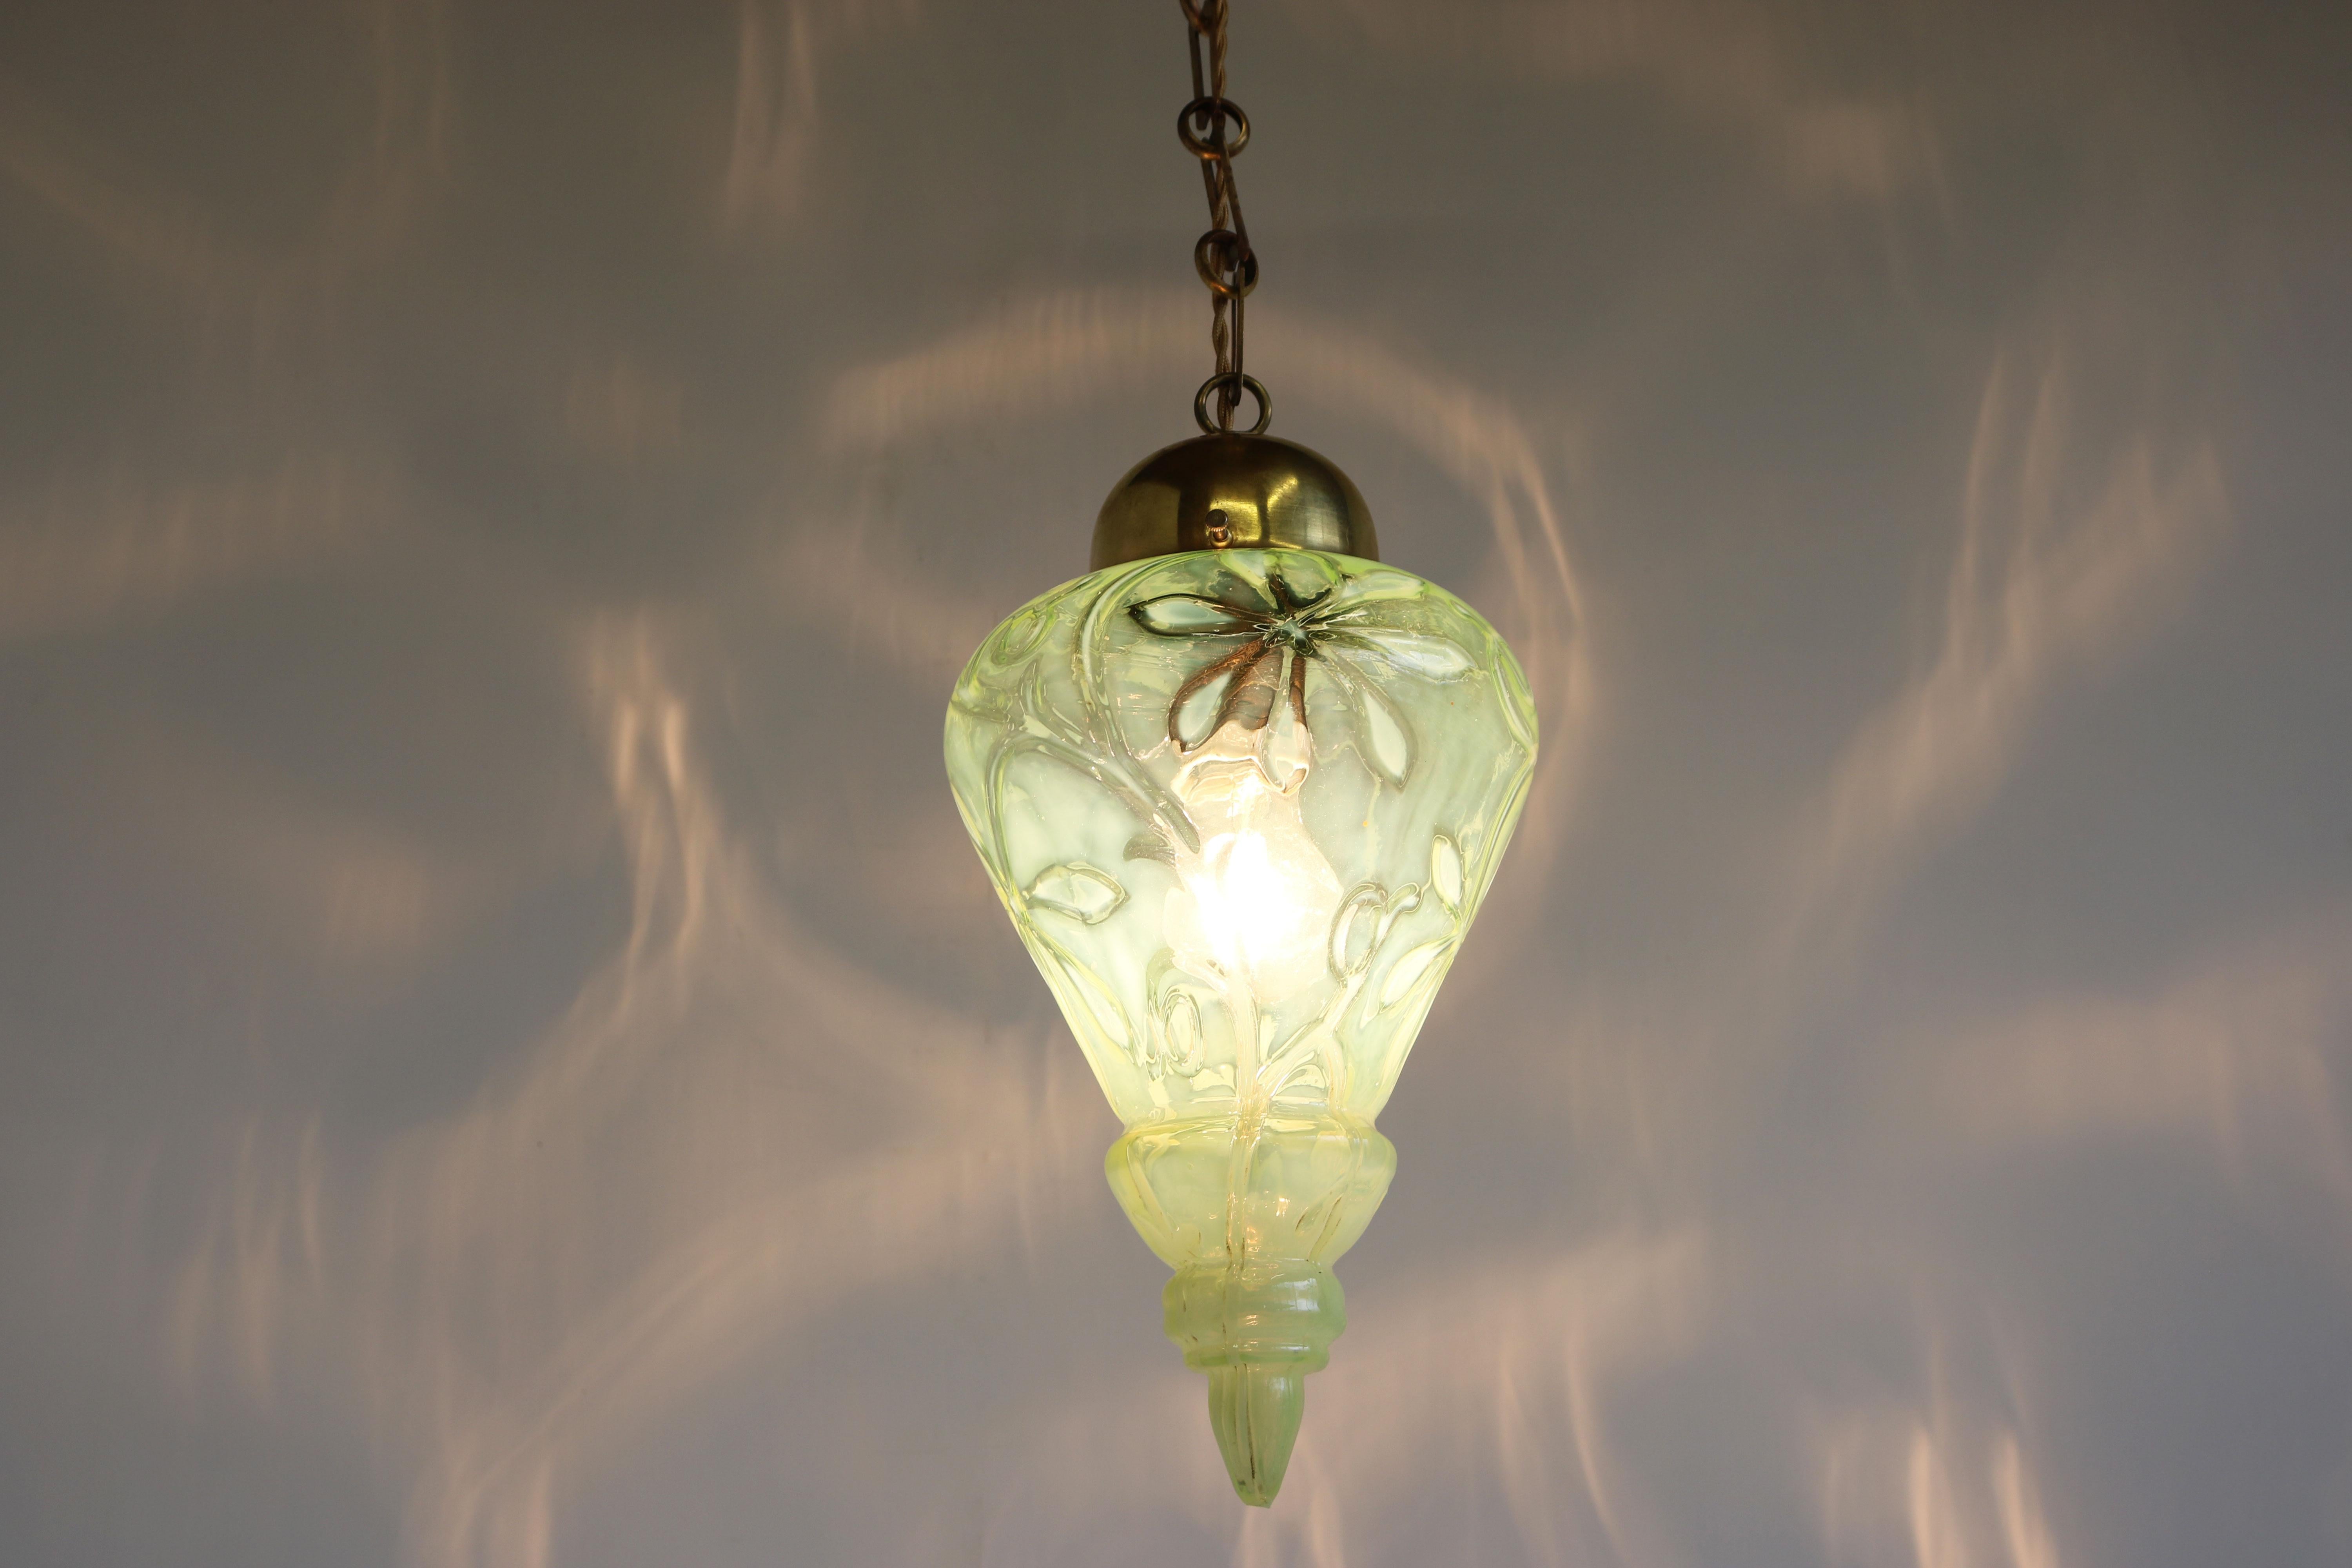 Hand-Crafted Arts & Crafts Pendant Light by Henry G. Richardson & Sons 1900 Vaseline Glass For Sale